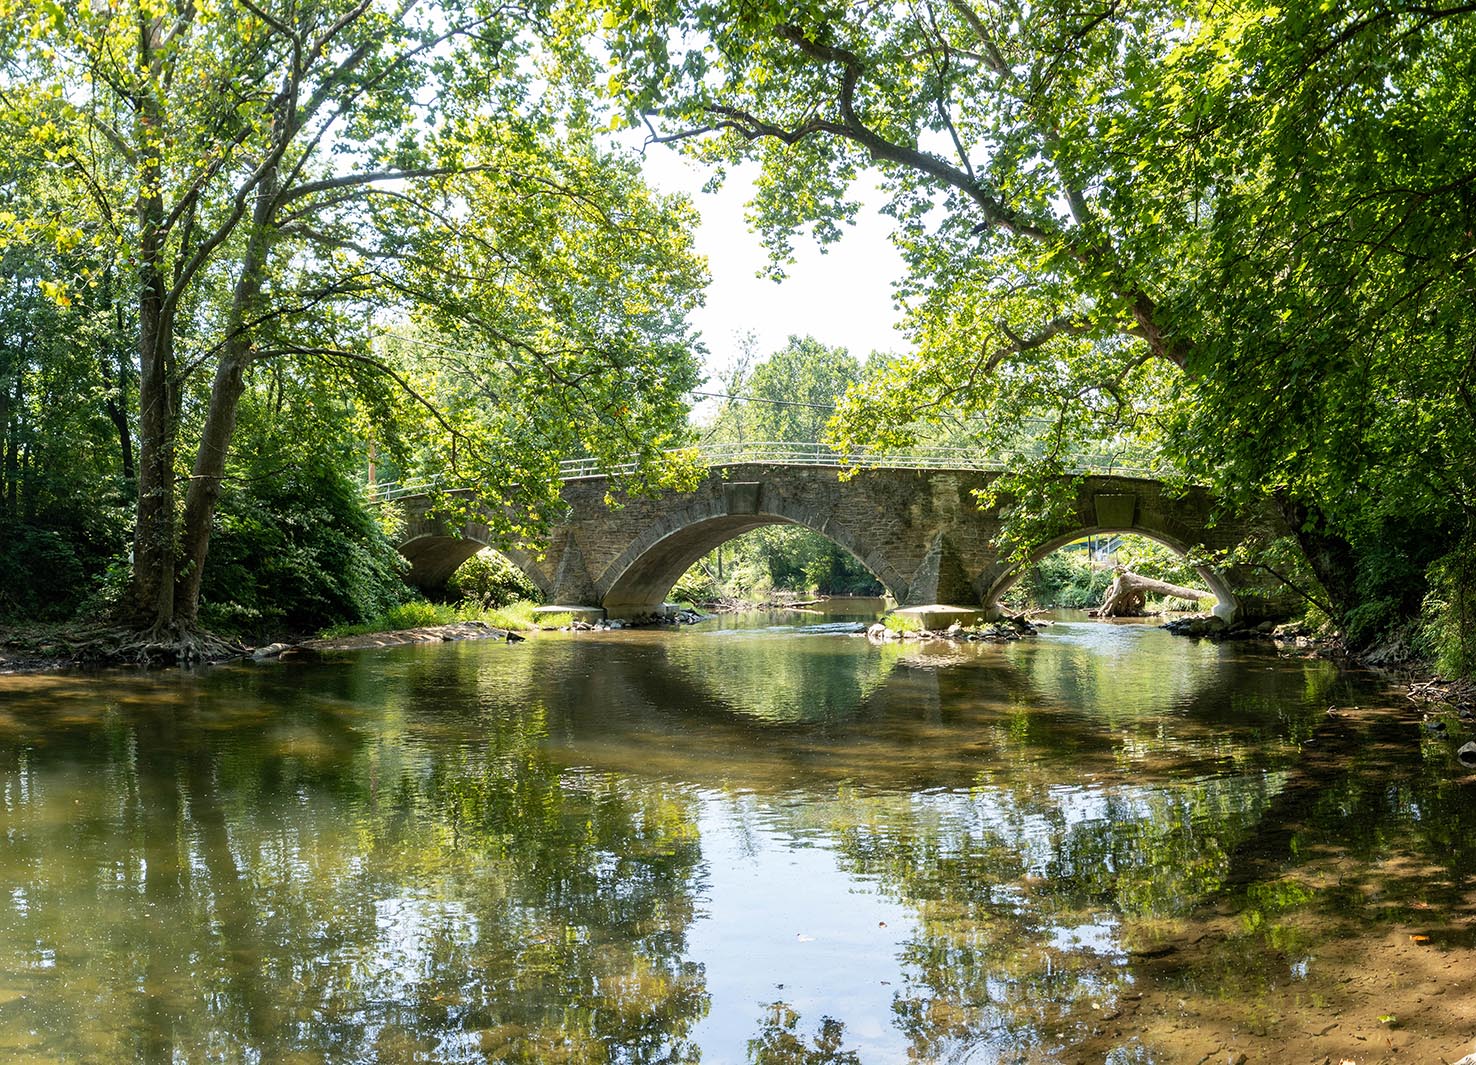 Arched stone bridge over stream surrounded by trees